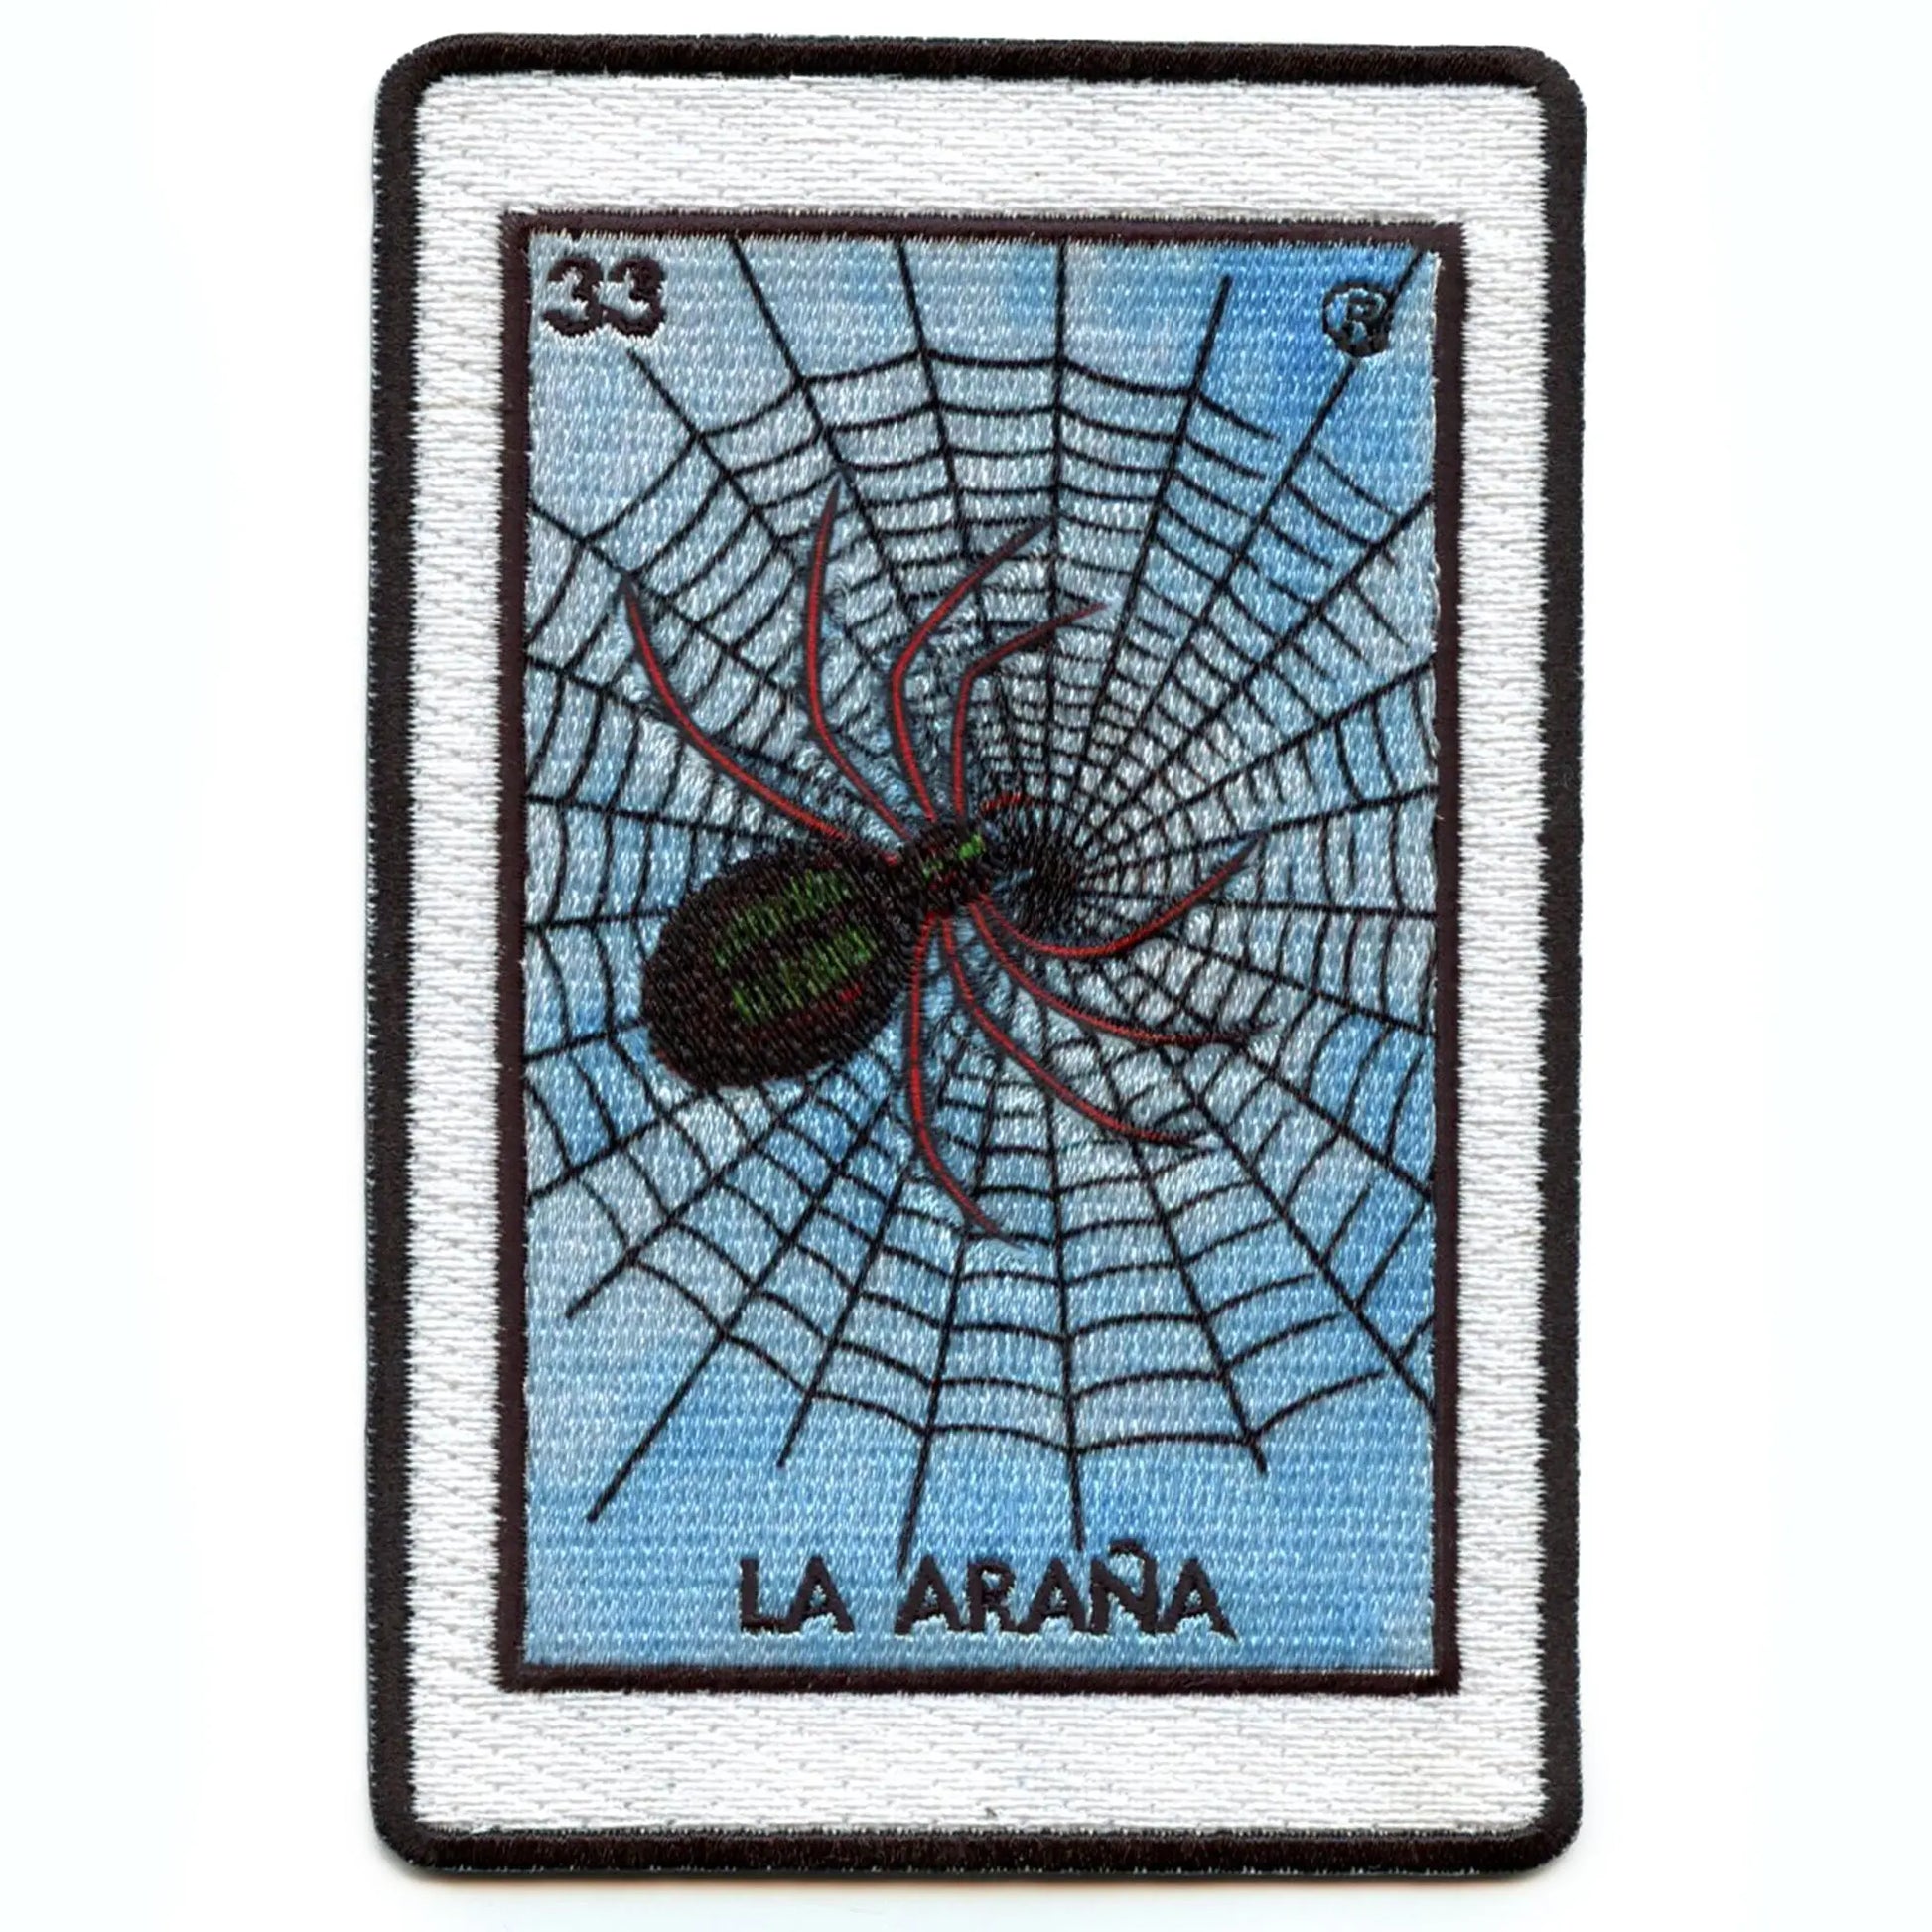 La Arana 33 Patch Mexican Loteria Card Sublimated Embroidery Iron On